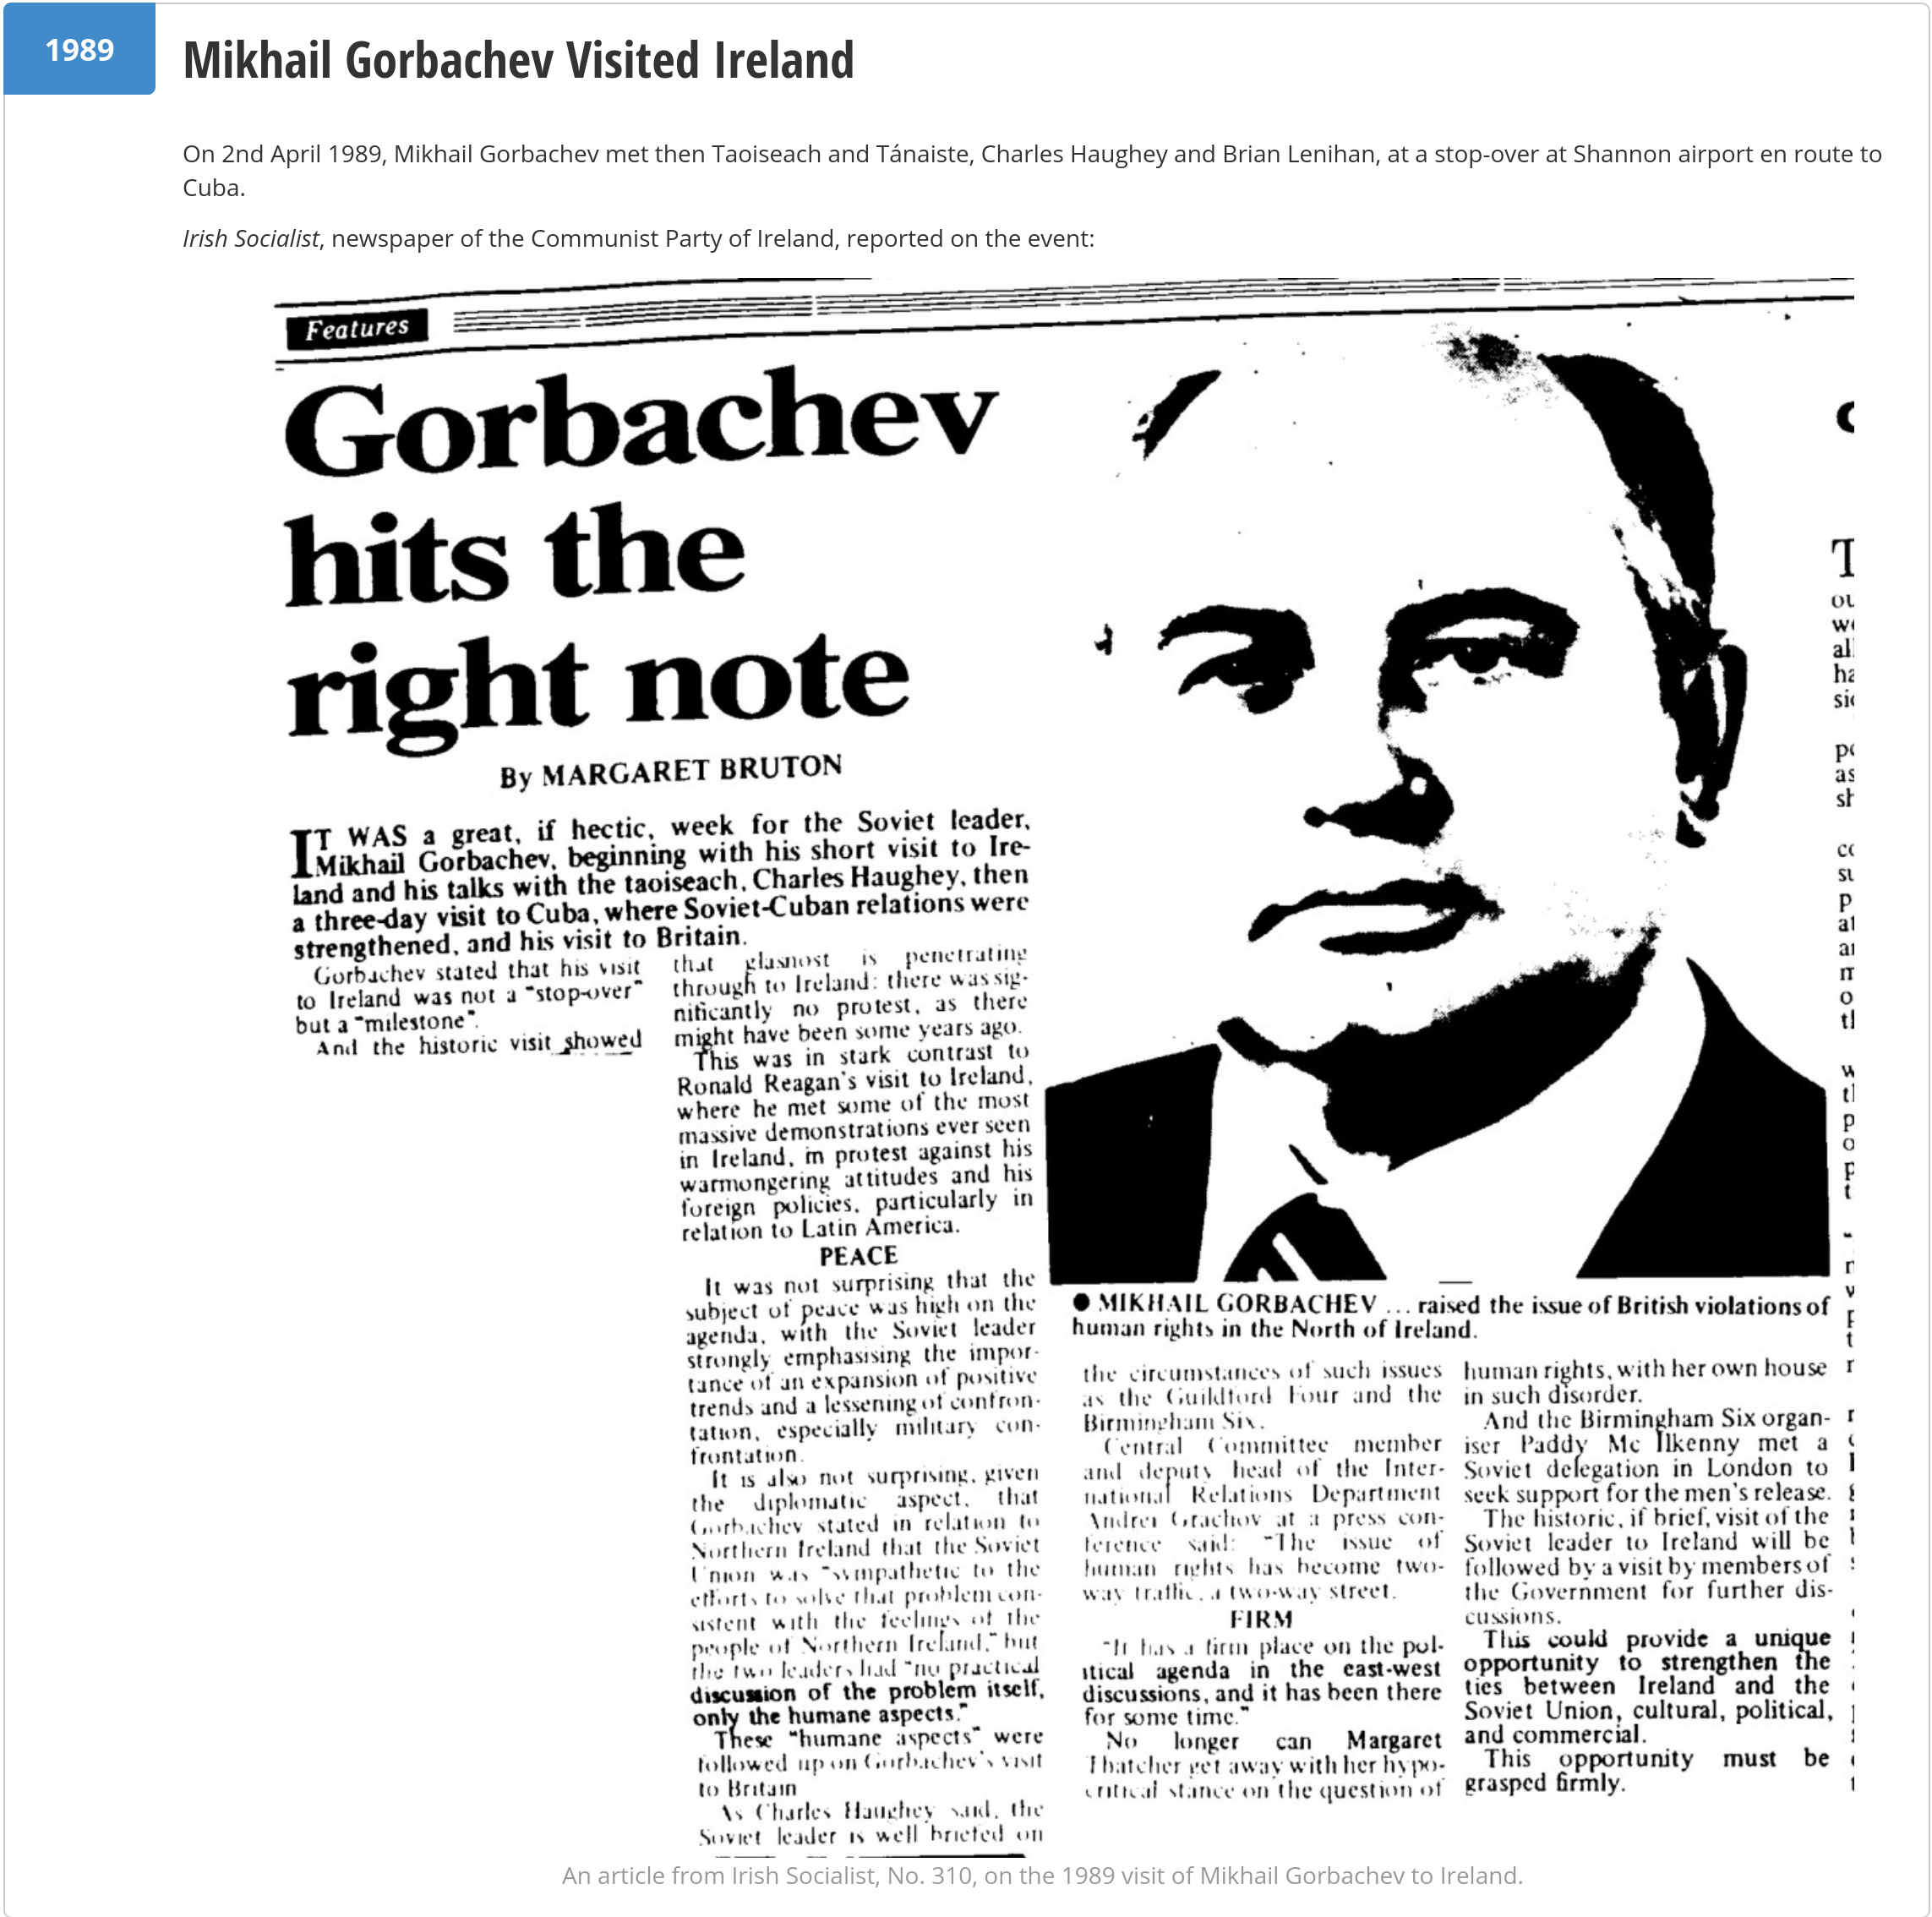 Screenshot of a web page, reading: 1989 Mikhail Gorbachev Visited Ireland.  On 2nd April 1989, Mikhail Gorbachev met then Taoiseach and Tánaiste, Charles Haughey and Brian Lenihan, at a stop-over at Shannon airport en route to Cuba. Irish Socialist, newspaper of the Communist Party of Ireland, reported on the event.

A scanned image of an article in Irish Socialist is below the text, with the headline Gorbachev Hits the Right Note. (Full article alt text on the page linked in this post).